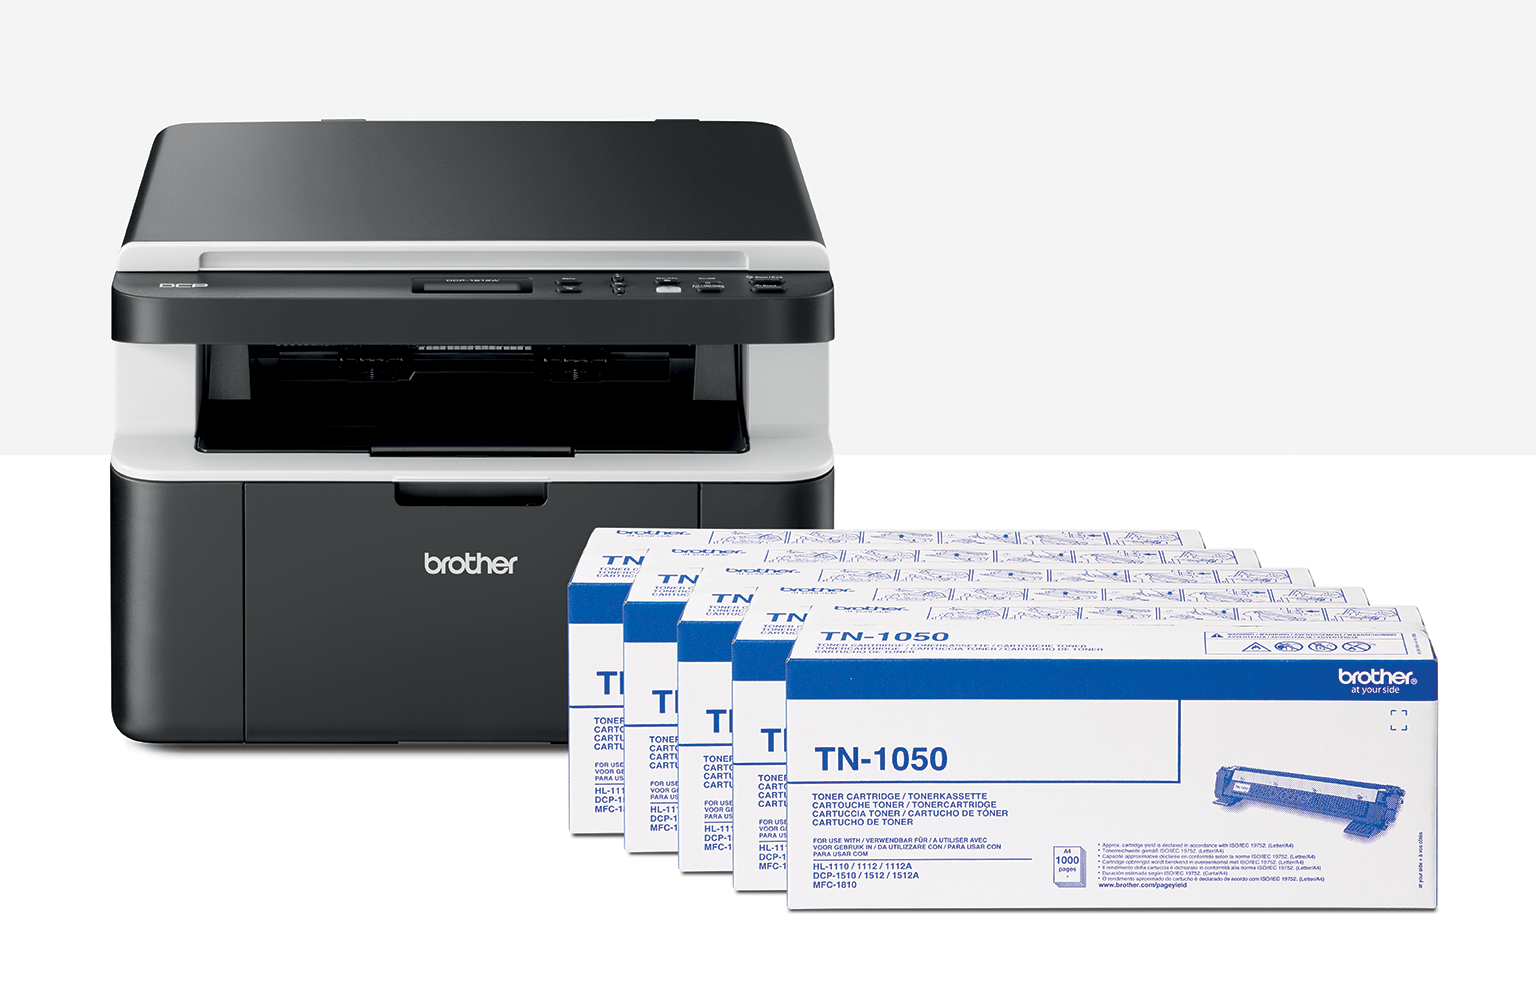 Brother DCP-1612W All-In-Box | All-In-One Laserdrucker | Brother